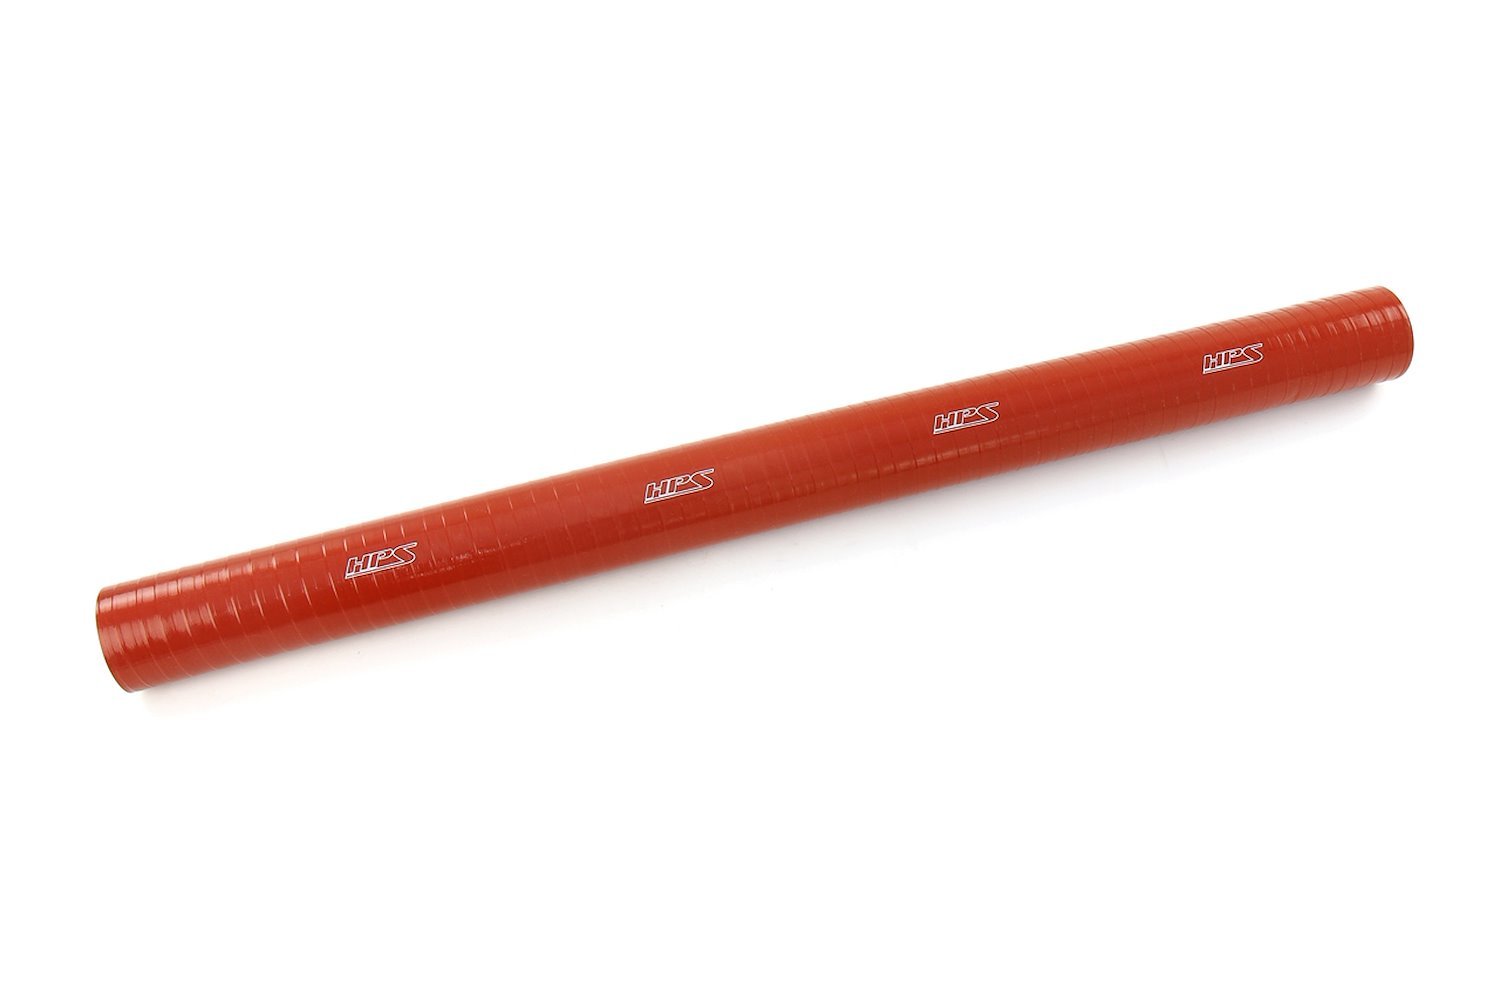 ST-3F-175-HOT Silicone Coolant Tube, Ultra High-Temp 4-Ply Reinforced, 1-3/4 in. ID, 3 ft. Long